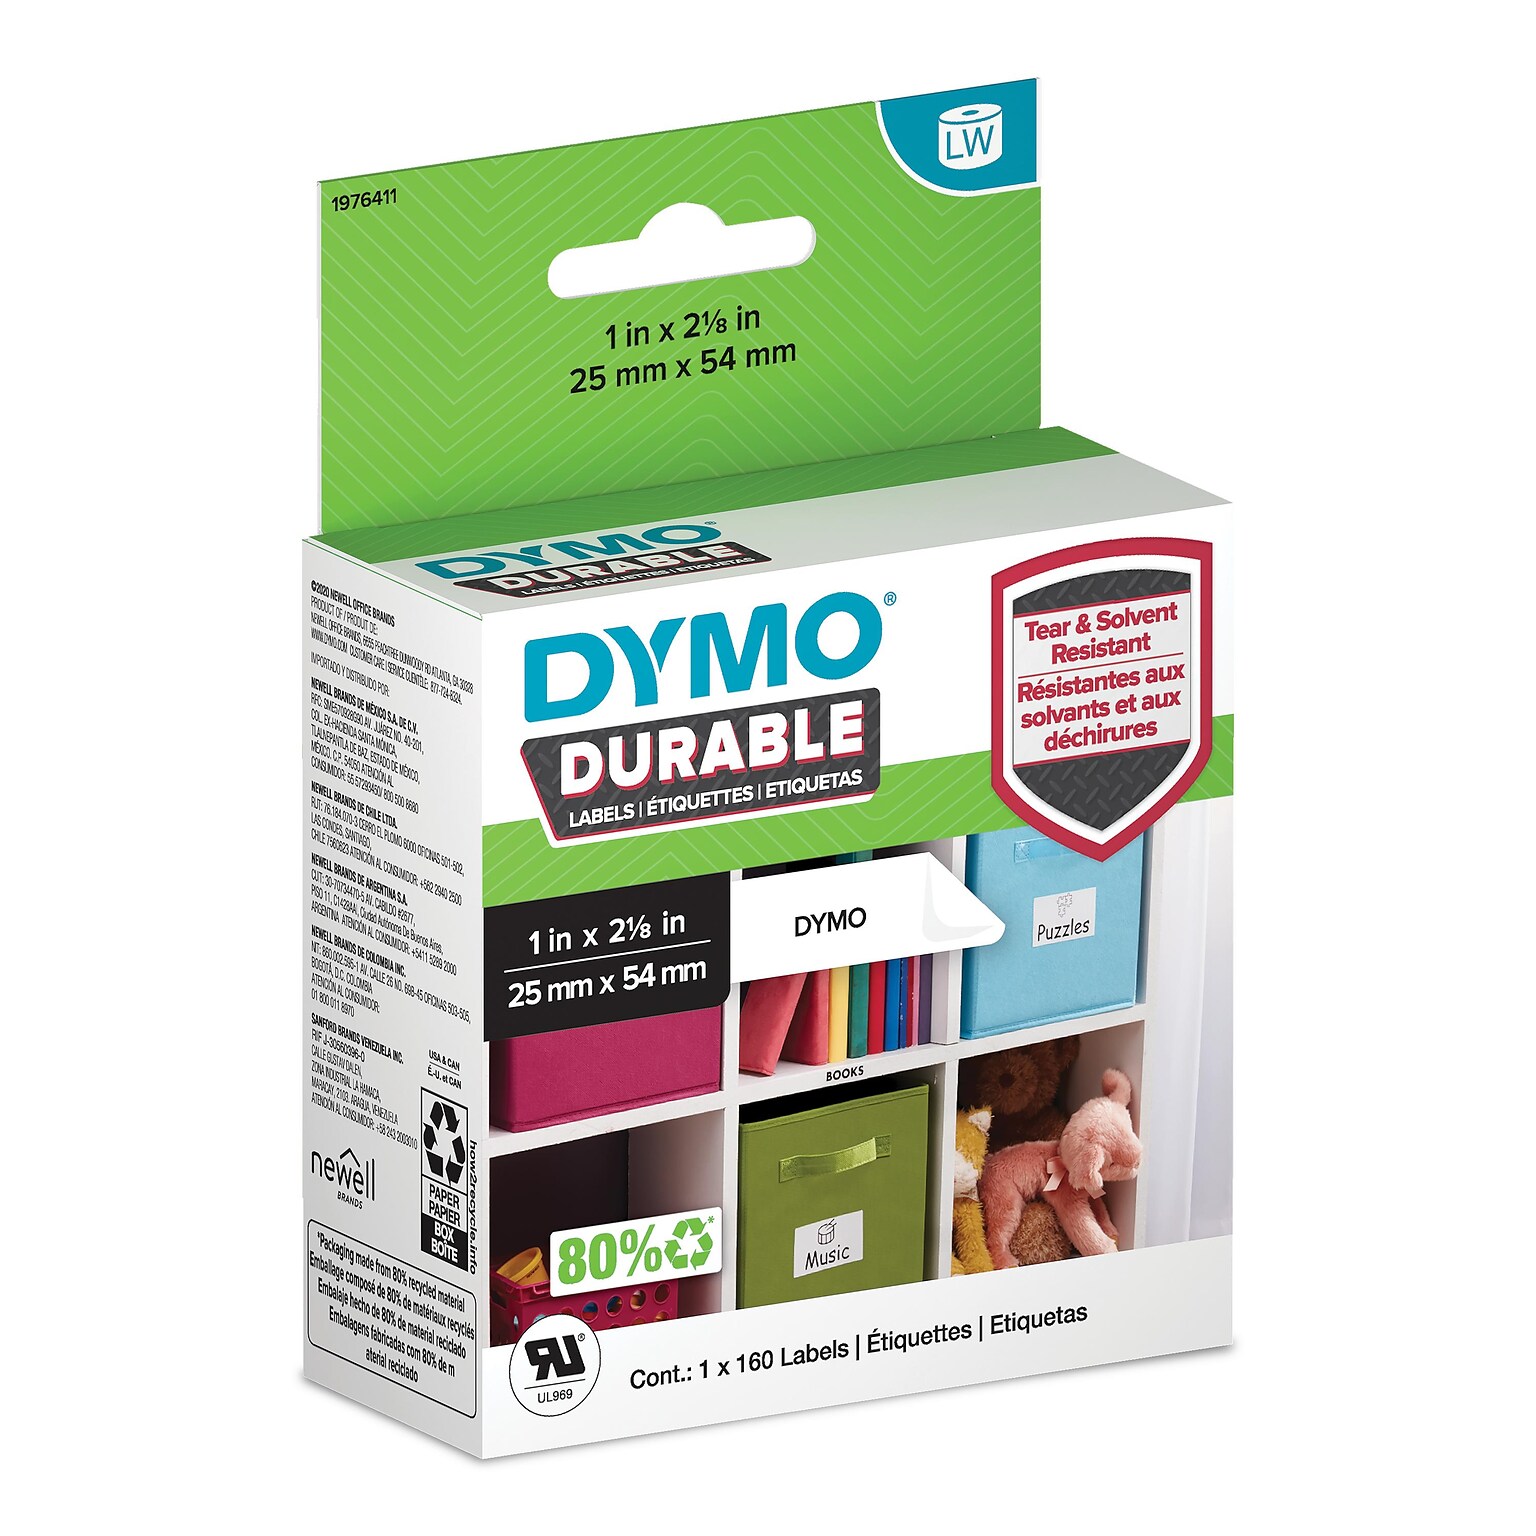 DYMO LabelWriter 1976411 Durable Industrial Labels, 2-1/8 x 1, Black on White, 160 Labels/Roll (1976411)